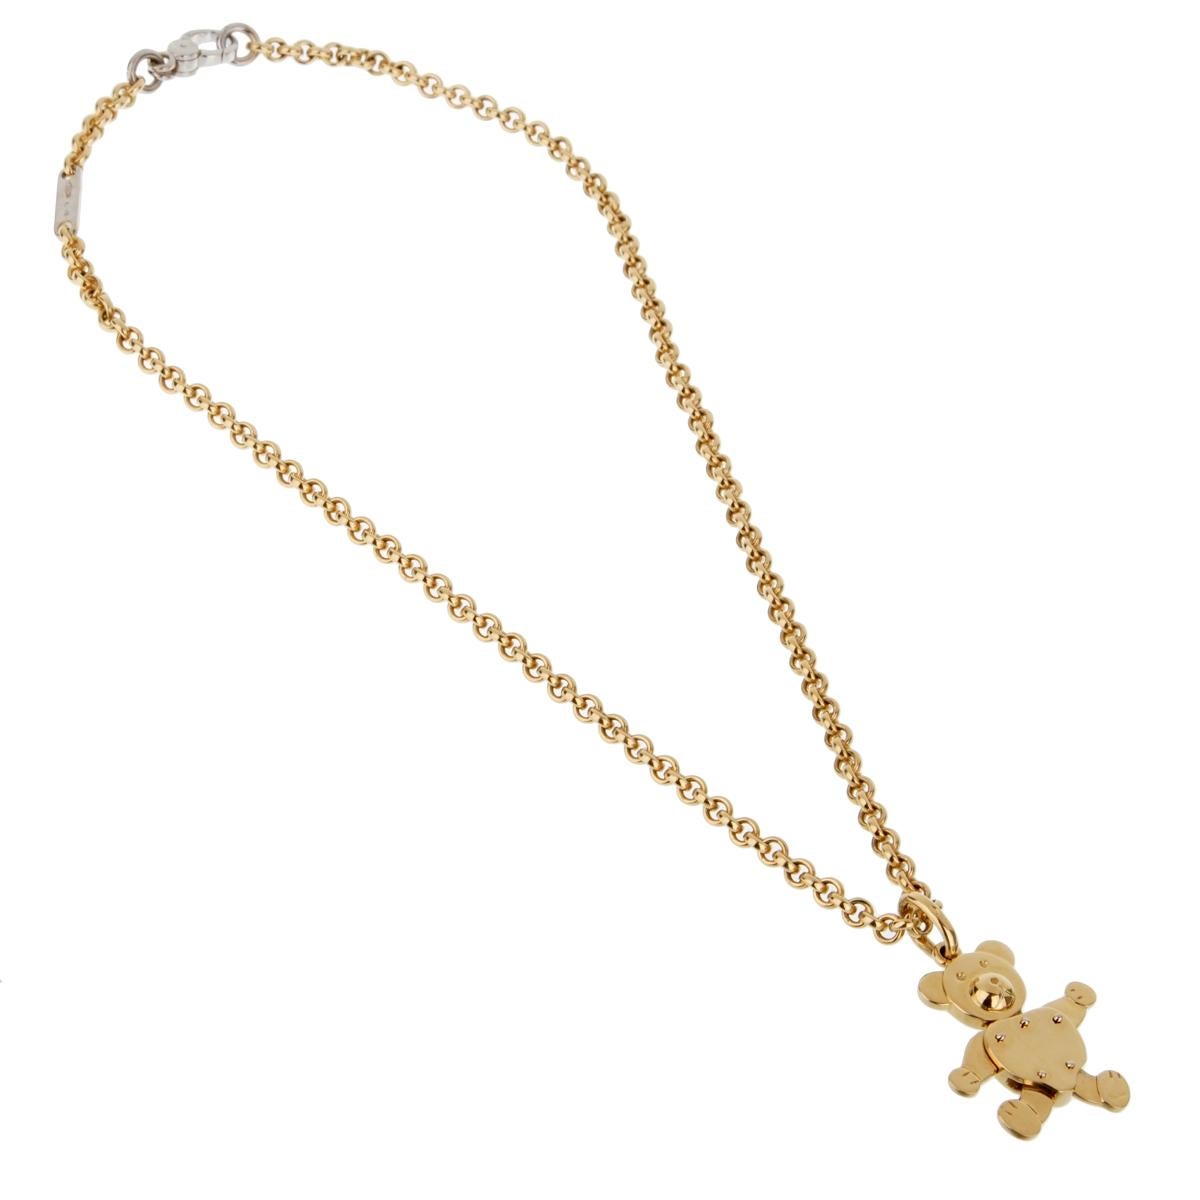 A chic brand new Pomellato Teddy Bear necklace crafted in 18k yellow gold. The necklace measures 16